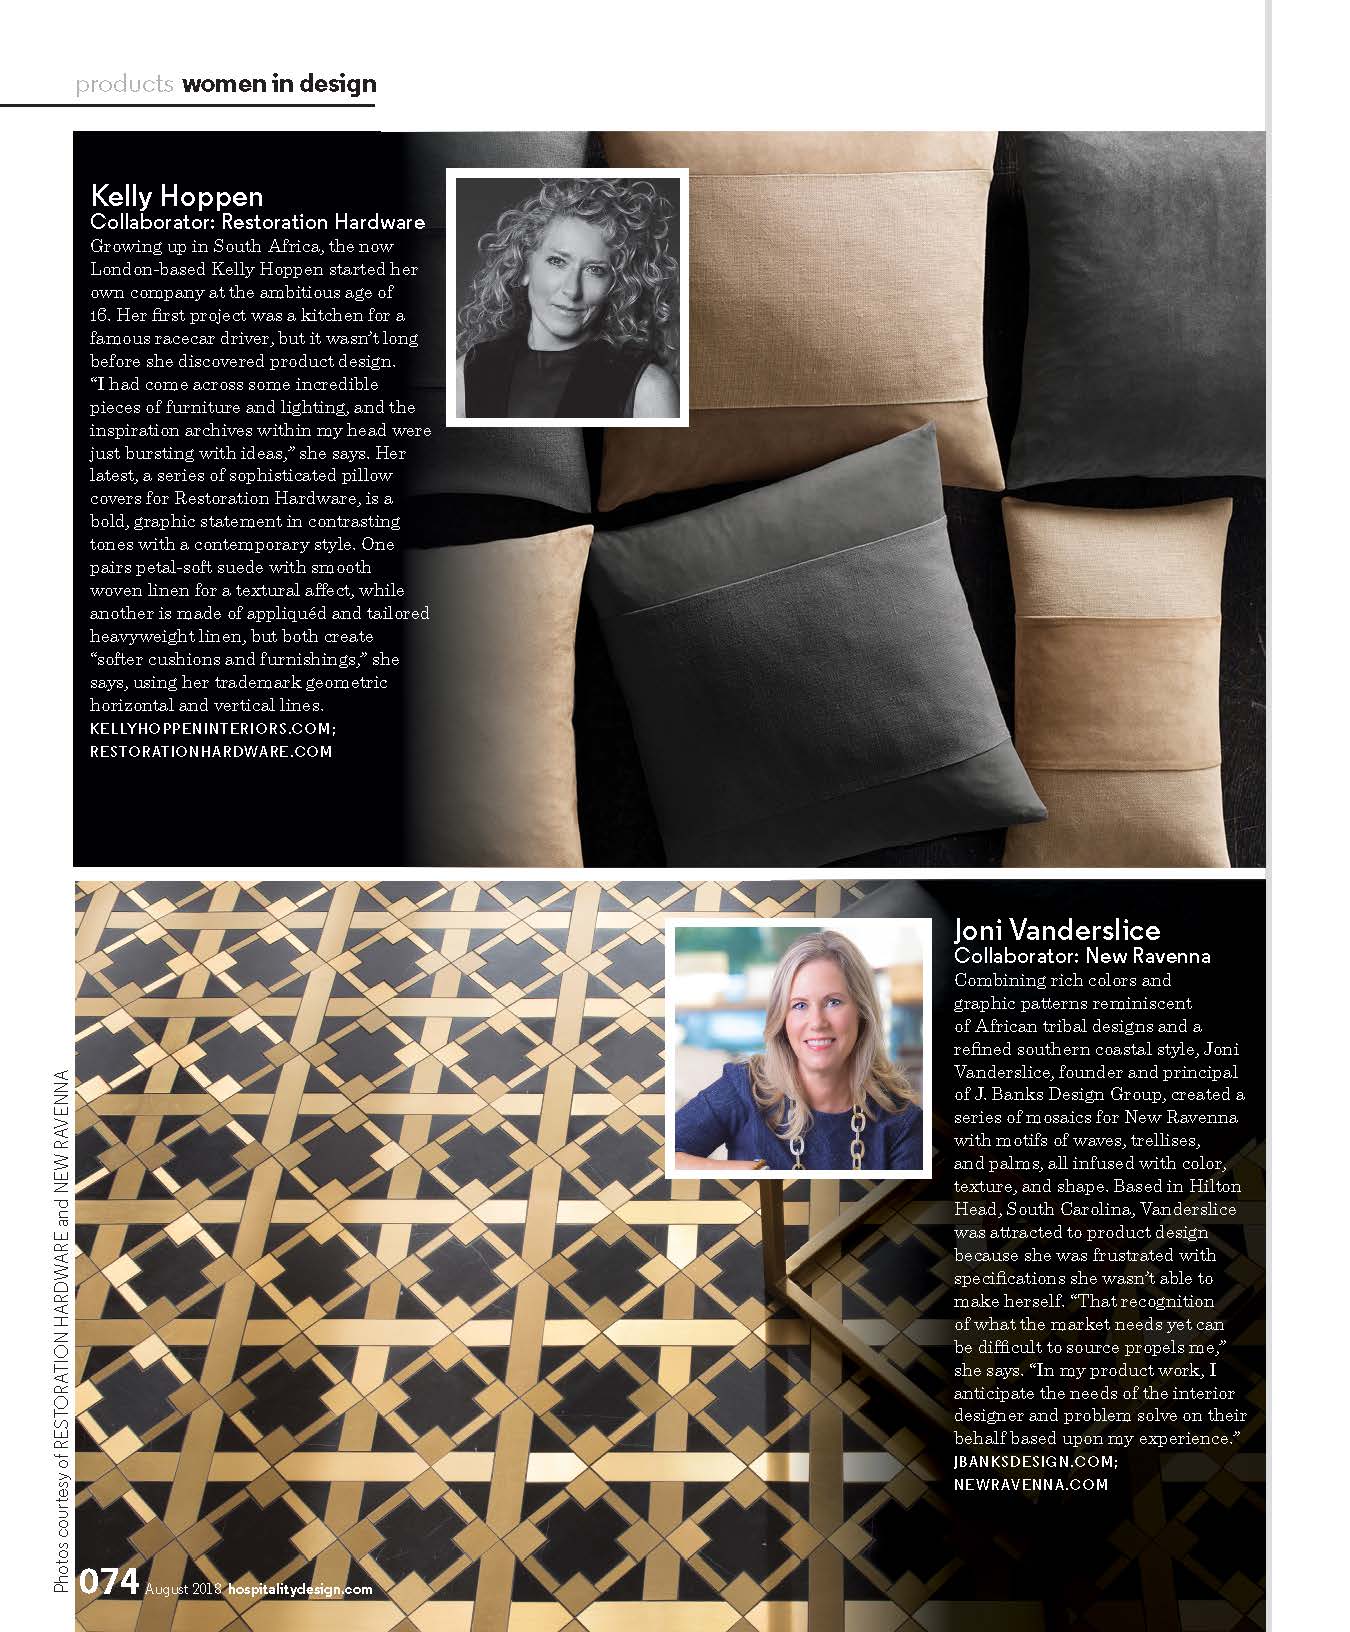 Joni Vanderslice featured in Hospitality Design‘s August “Women in Design” for the J Banks Collection for New Ravenna